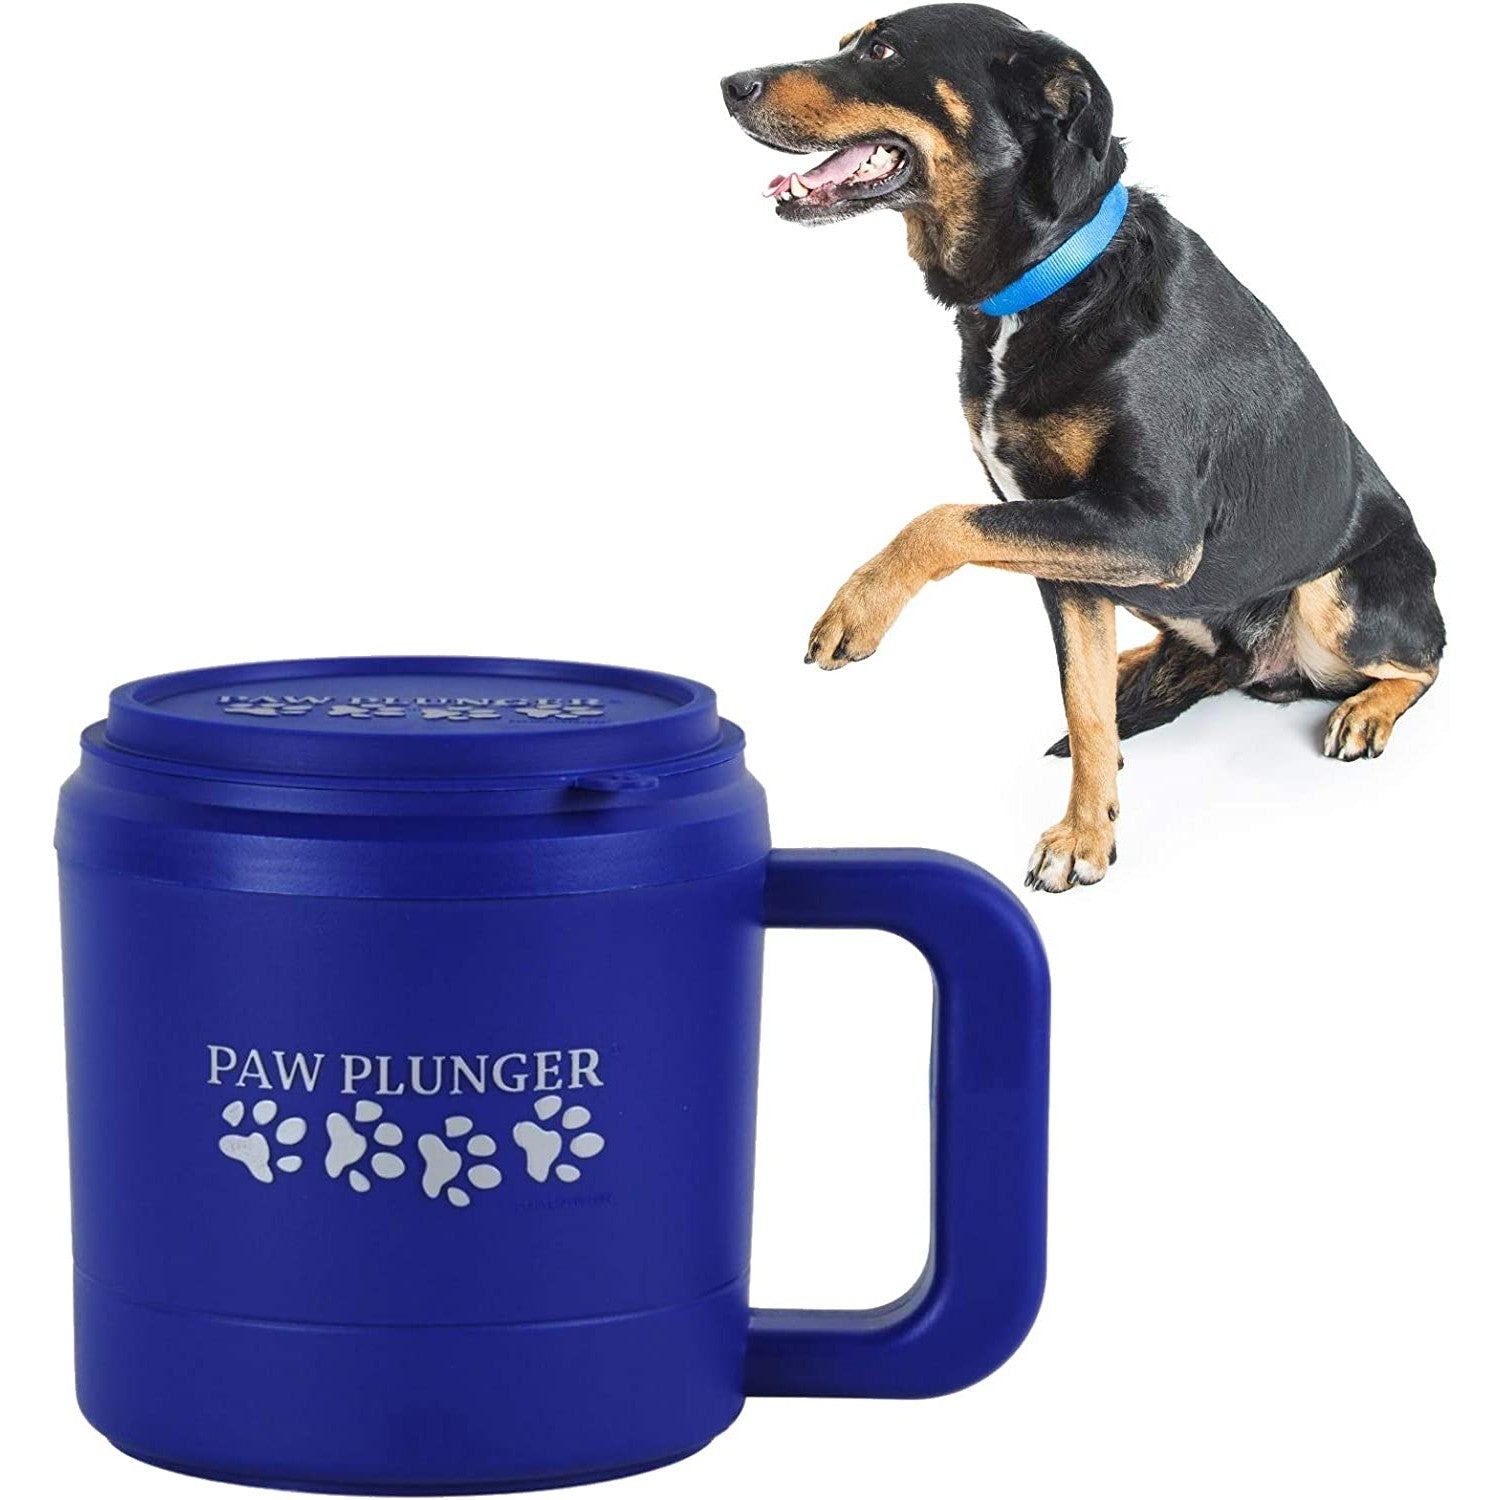 A blue colored dog paw plunger alongside a black and brown dog with his paw in the air.